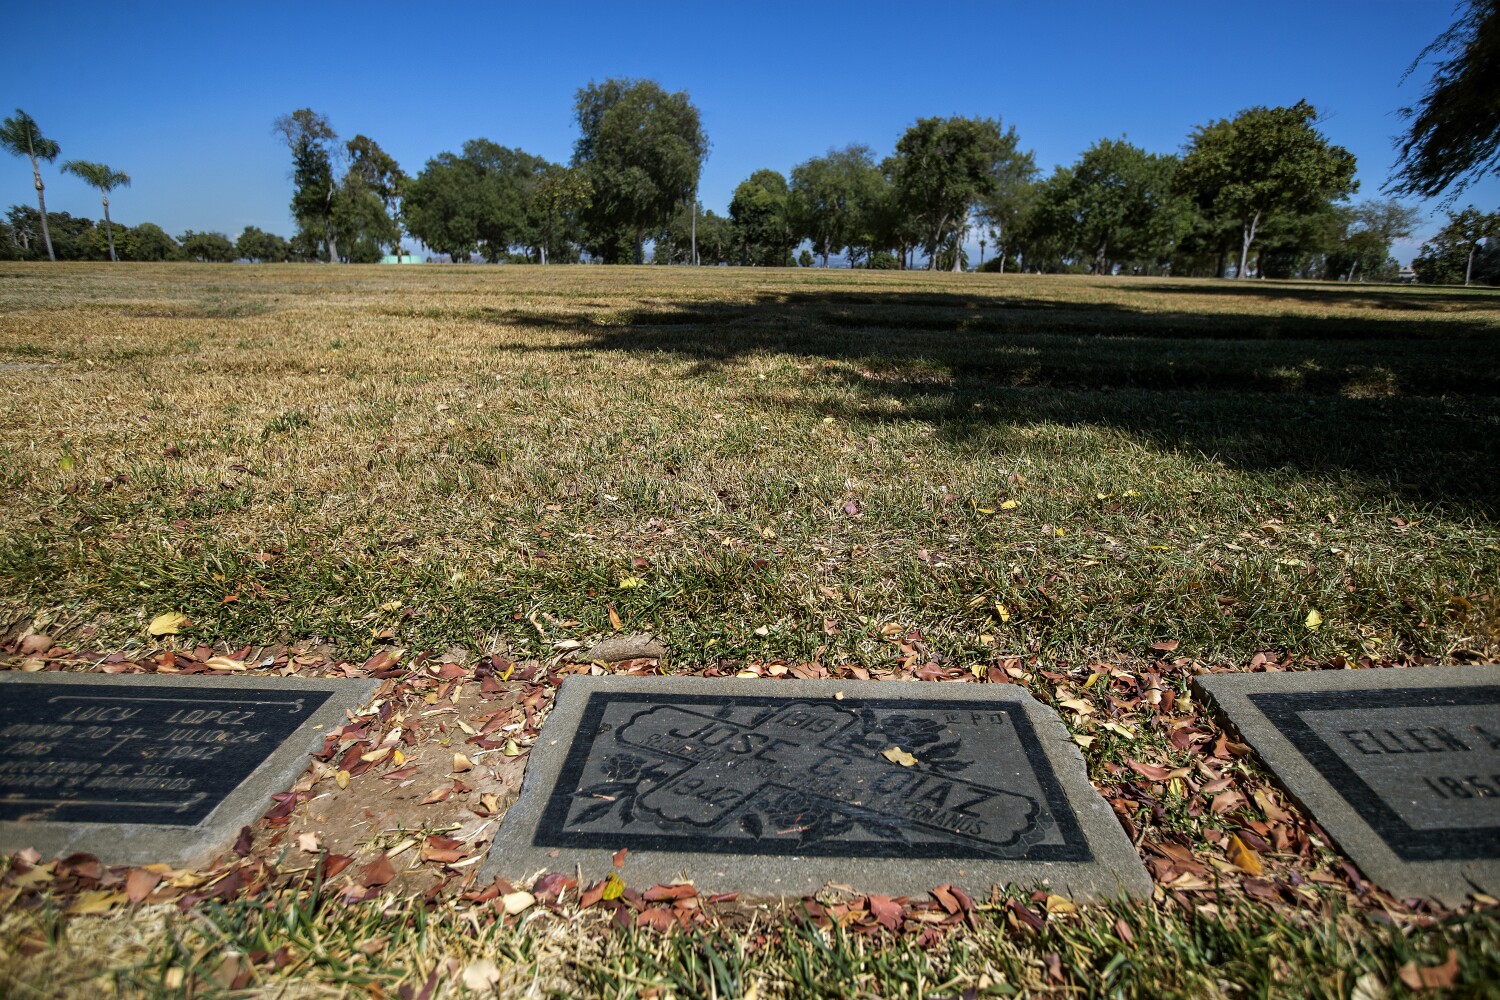 Column: Sleepy Lagoon, the Zoot Suit riots and the lonely grave in East L.A. that history has forgotten